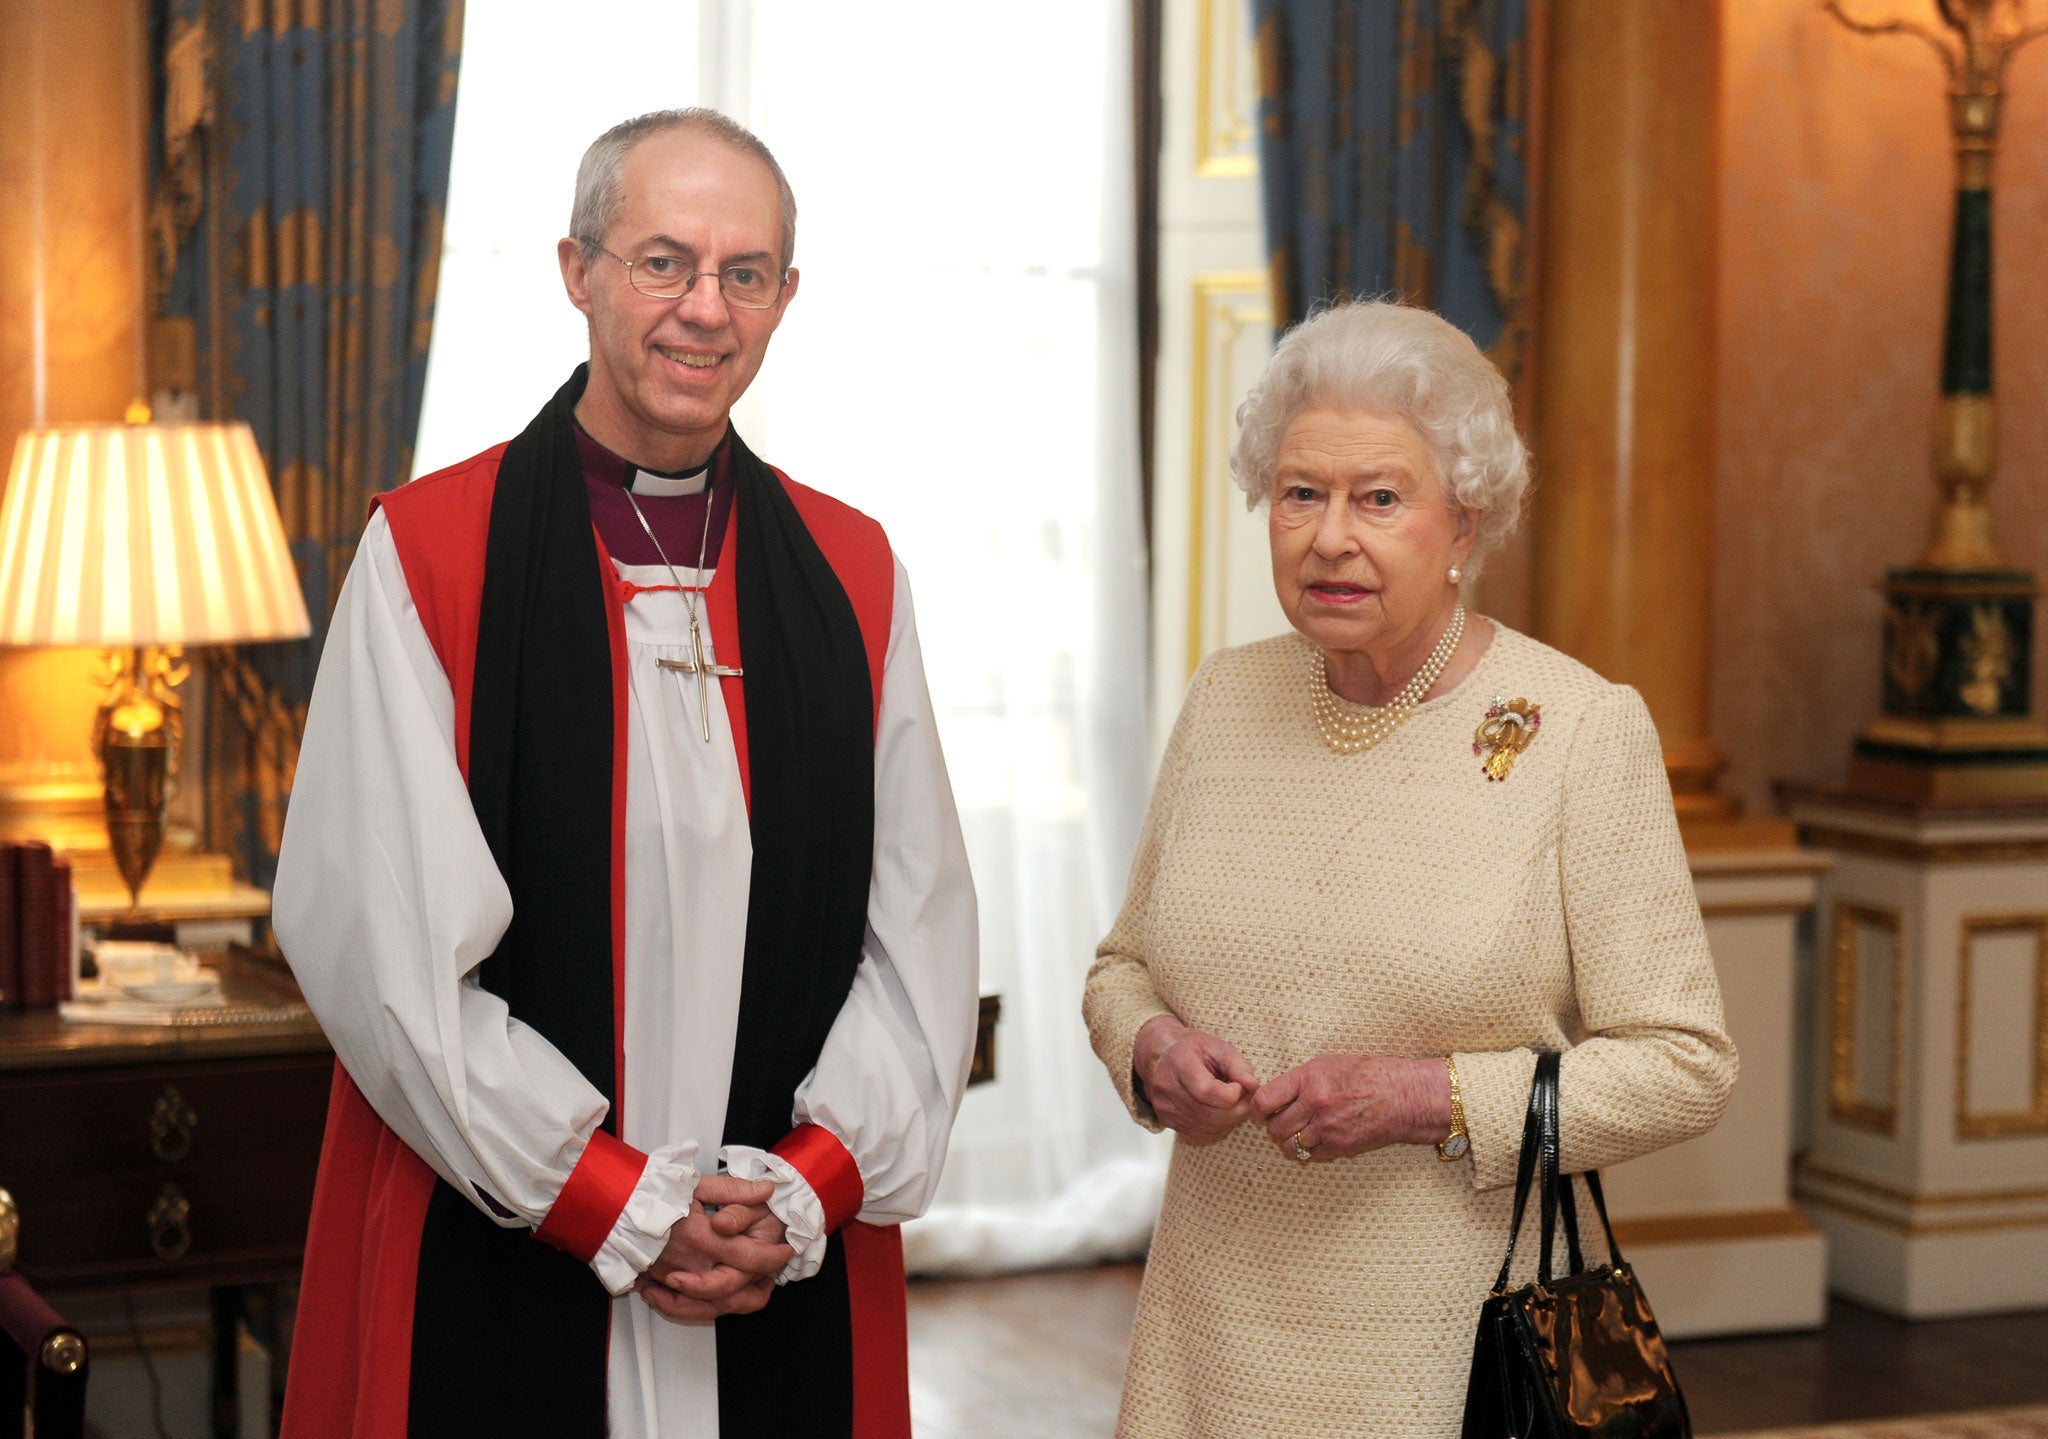 The Queen receives the Archbishop of Canterbury at Buckingham Palace